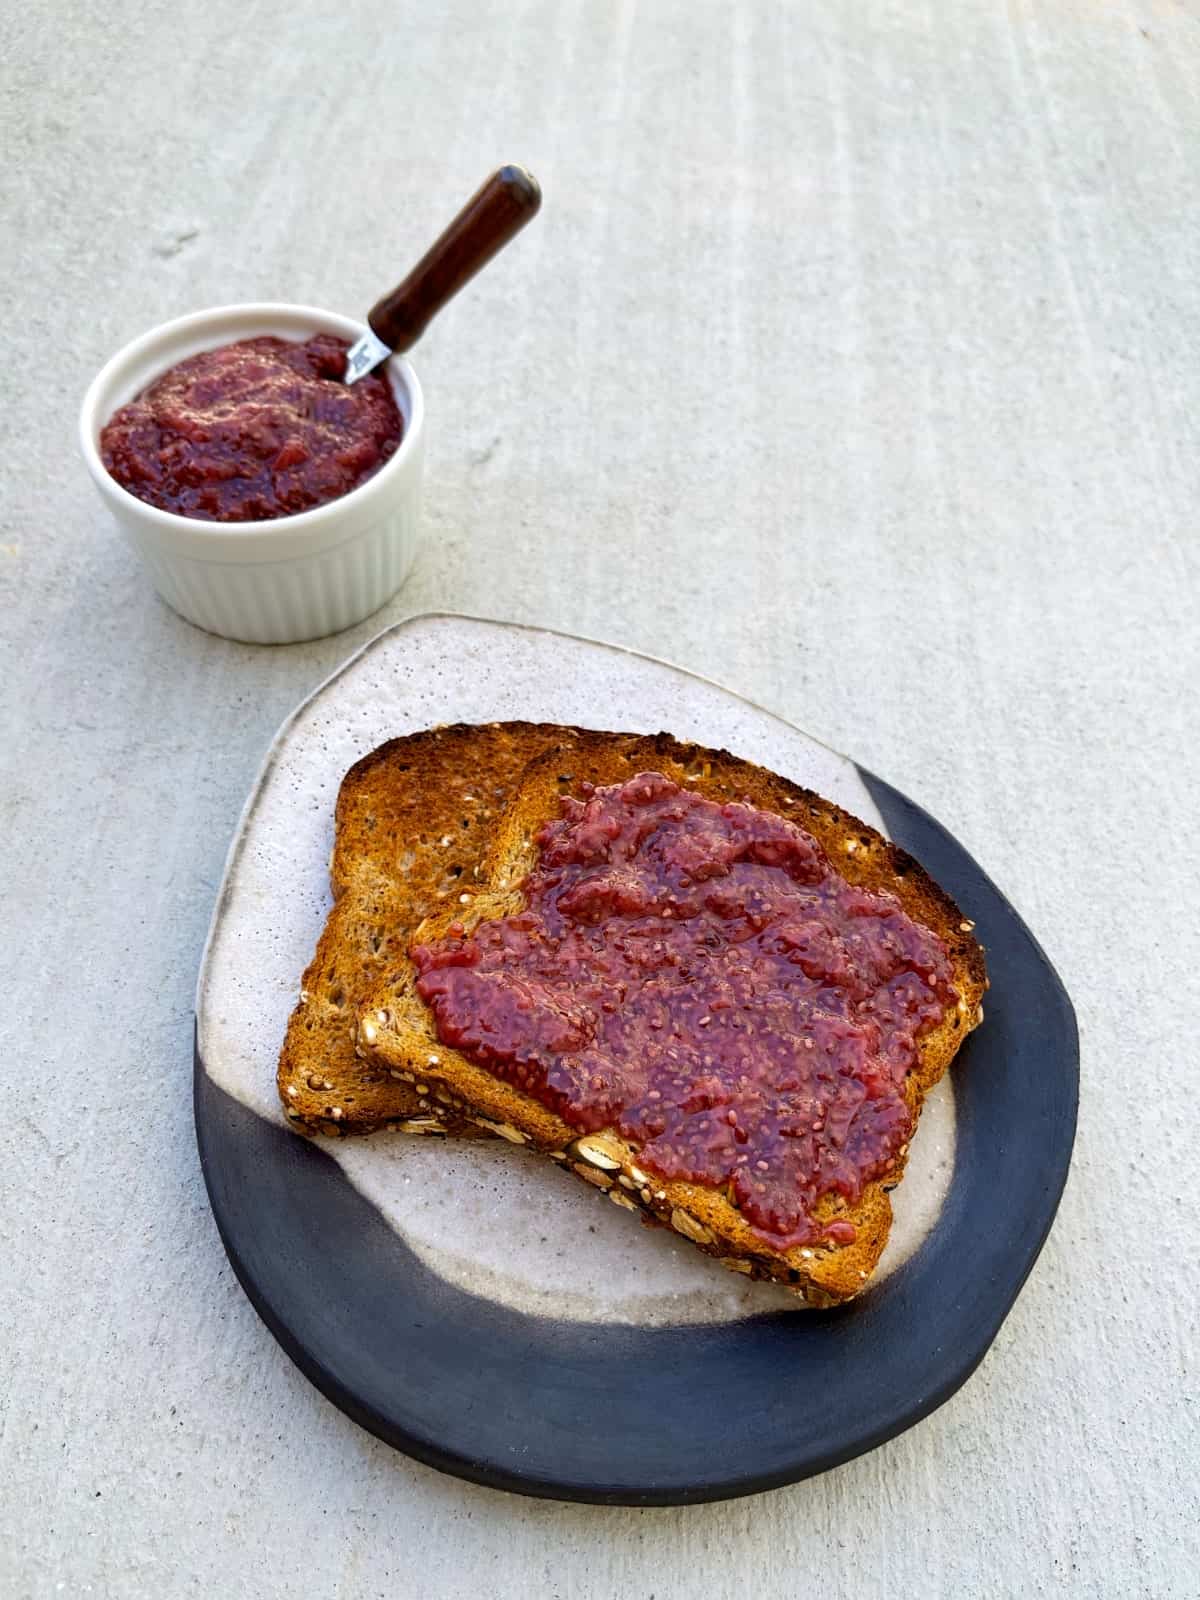 Strawberry chia jam on toast with small white ramekin of jam in the background.